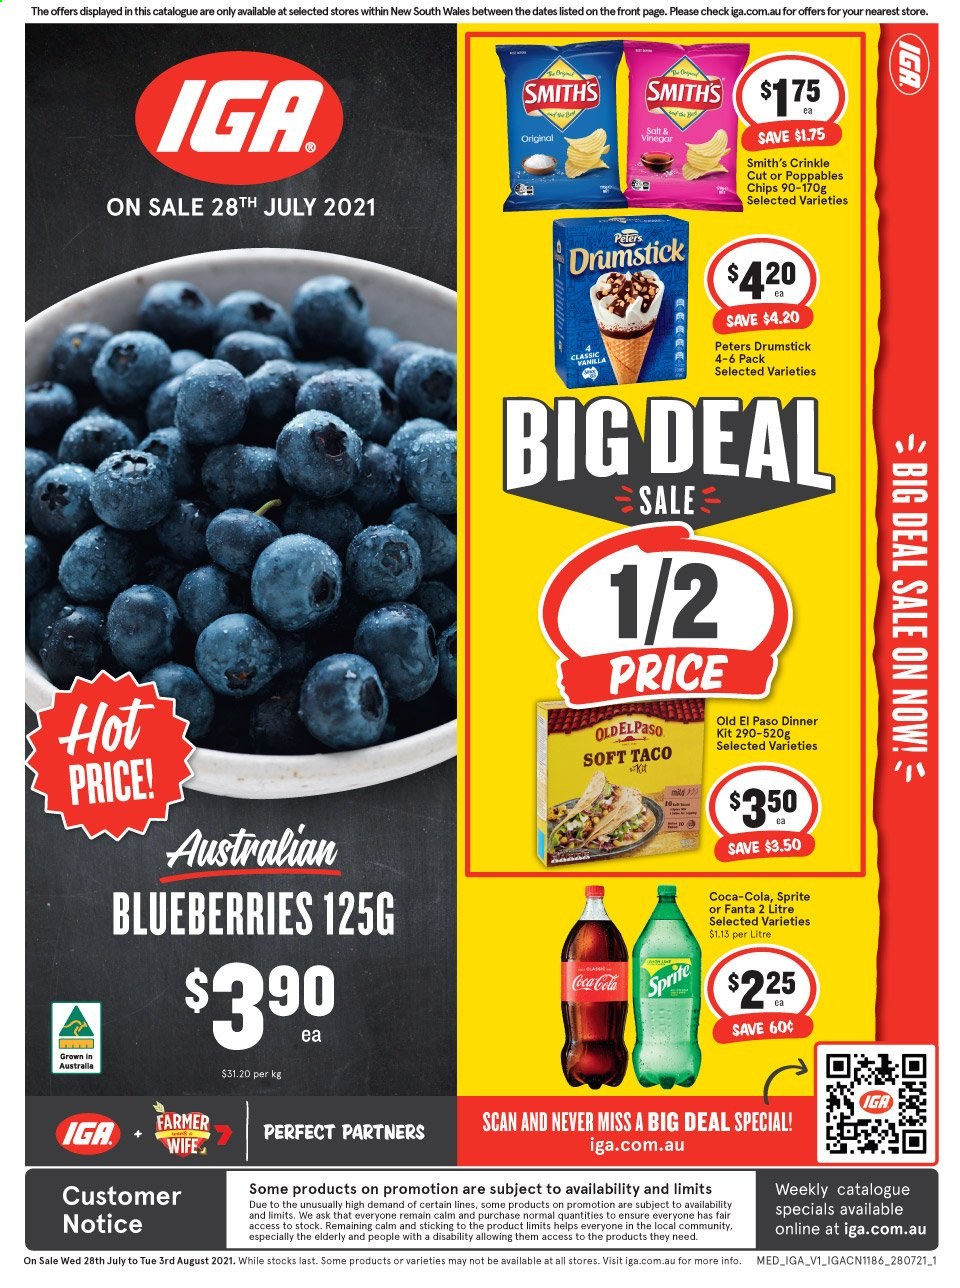 thumbnail - IGA Catalogue - 28 Jul 2021 - 3 Aug 2021 - Sales products - Old El Paso, blueberries, dinner kit, chips, Smith's, Coca-Cola, Sprite, Fanta. Page 1.